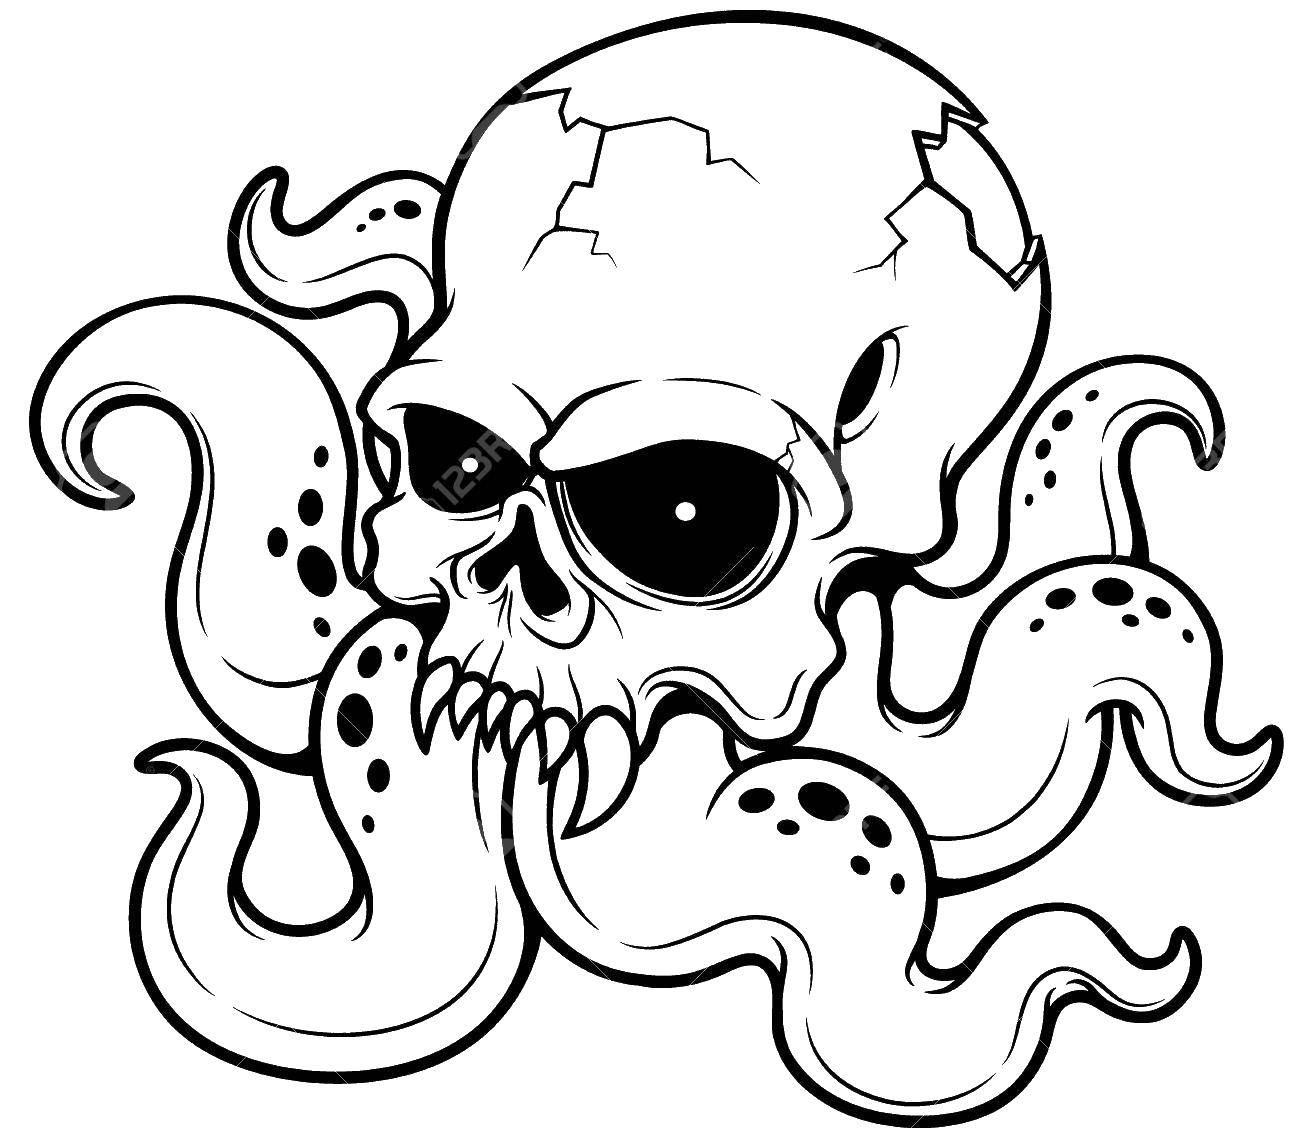 Coloring Skull with octopus legs. Category The contours of the cartoons. Tags:  skull, octopus.